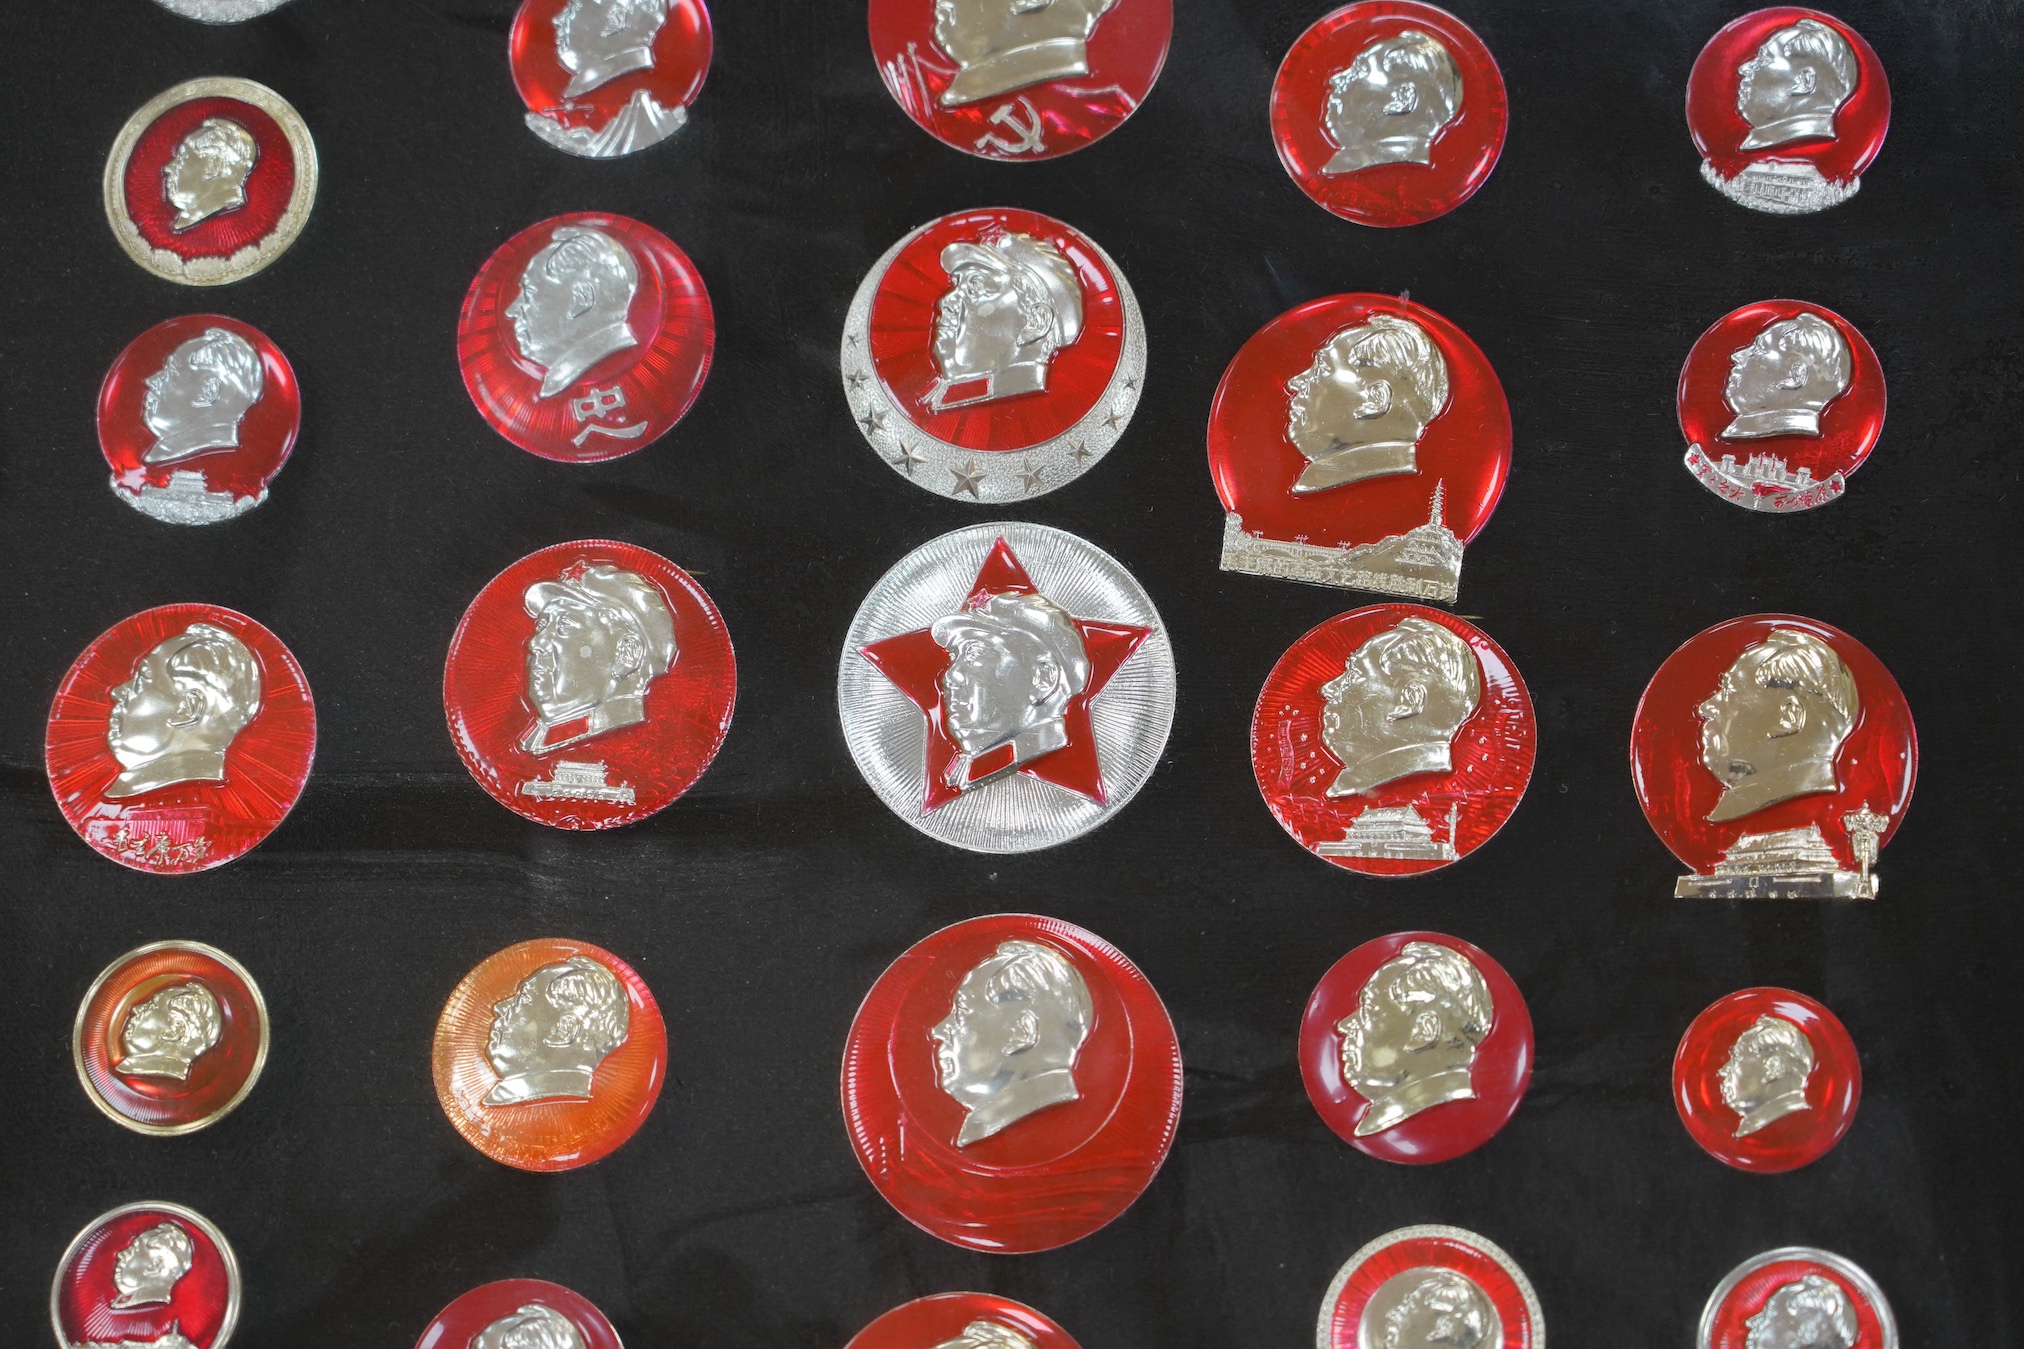 A display case of Chinese red enamelled badges with the head of Chairman Mao, 72 x 85cm